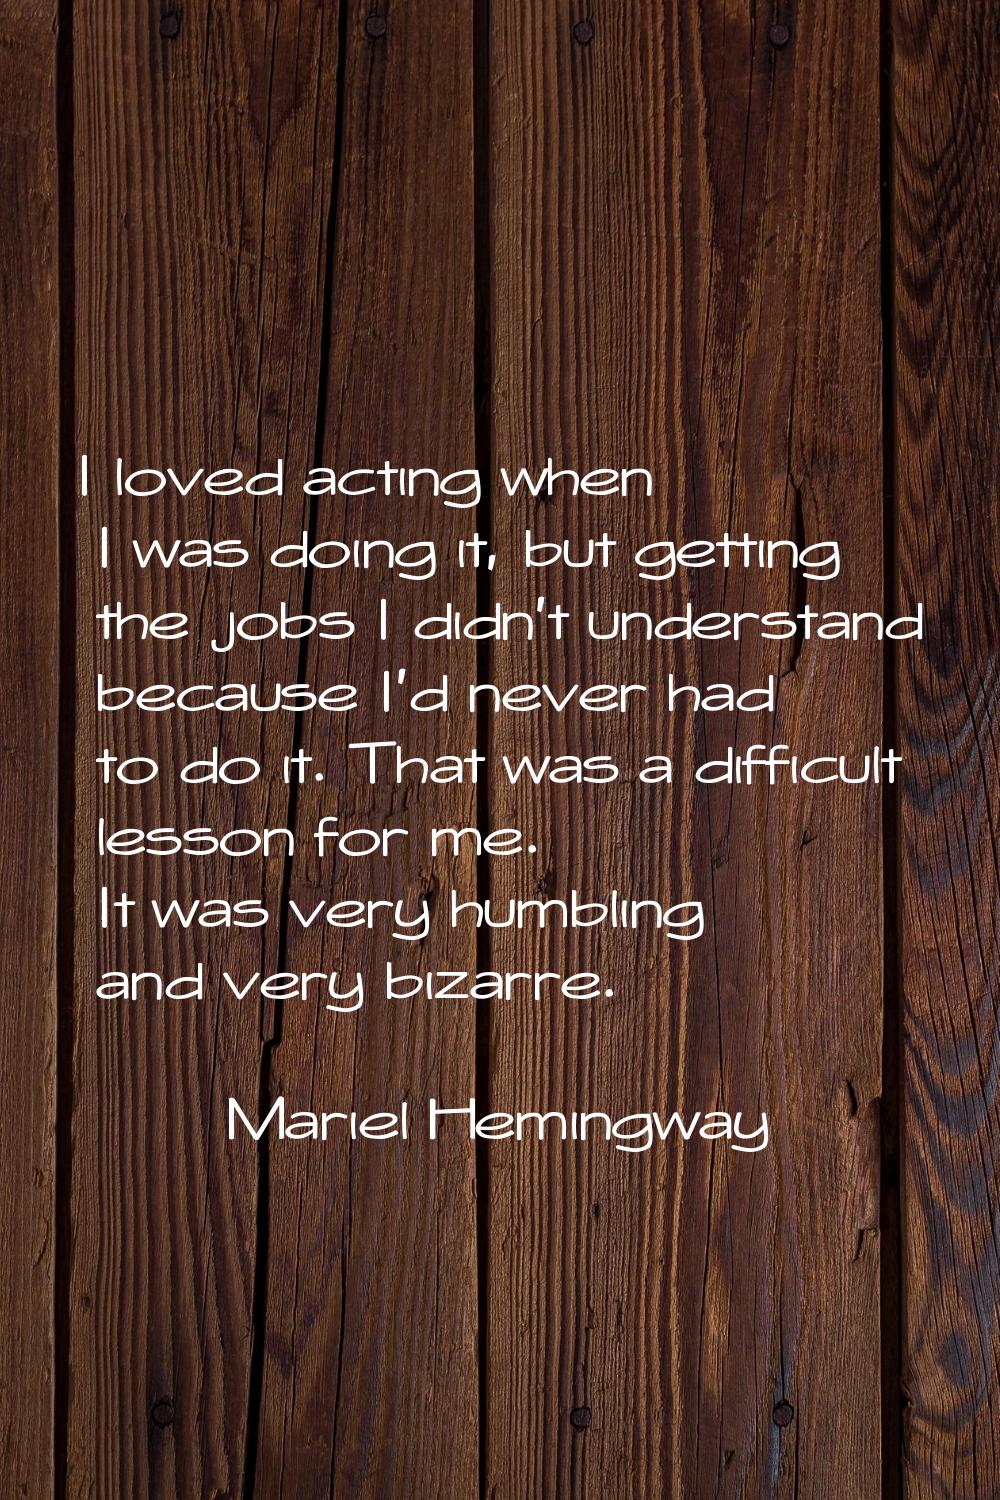 I loved acting when I was doing it, but getting the jobs I didn't understand because I'd never had 